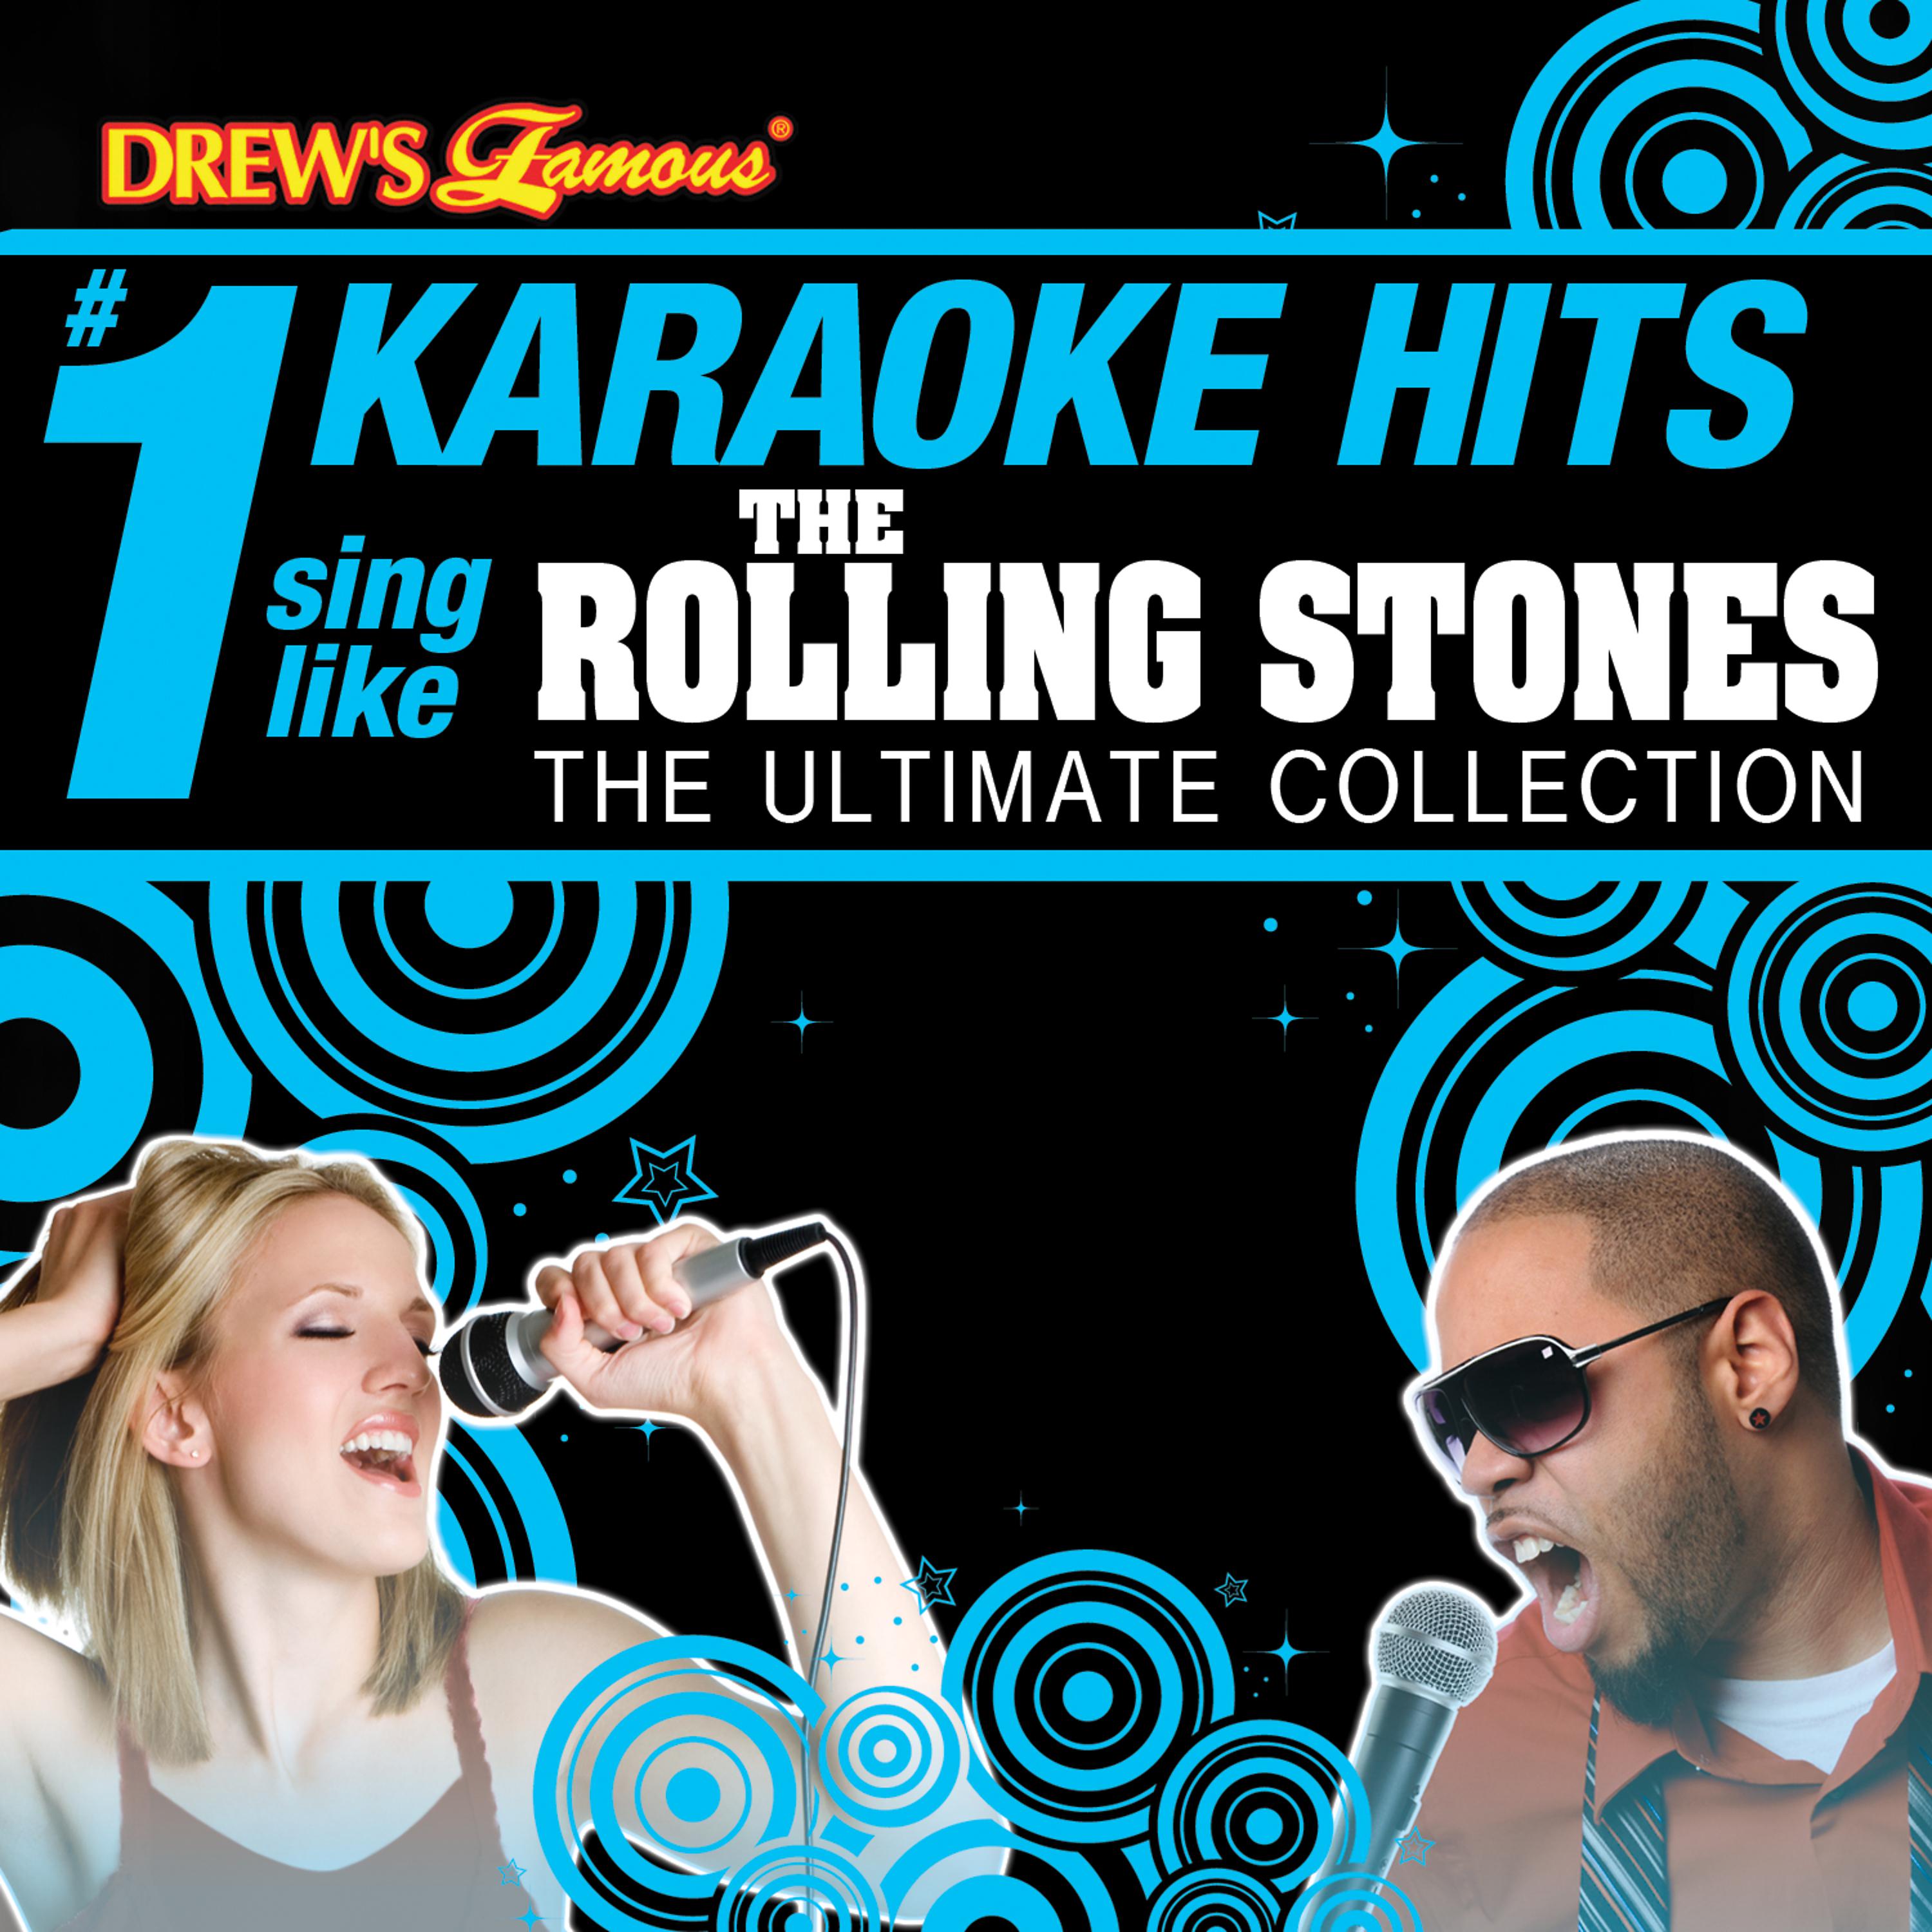 Постер альбома Drew's Famous #1 Karaoke Hits: Sing like The Rolling Stones: The Ultimate Collection